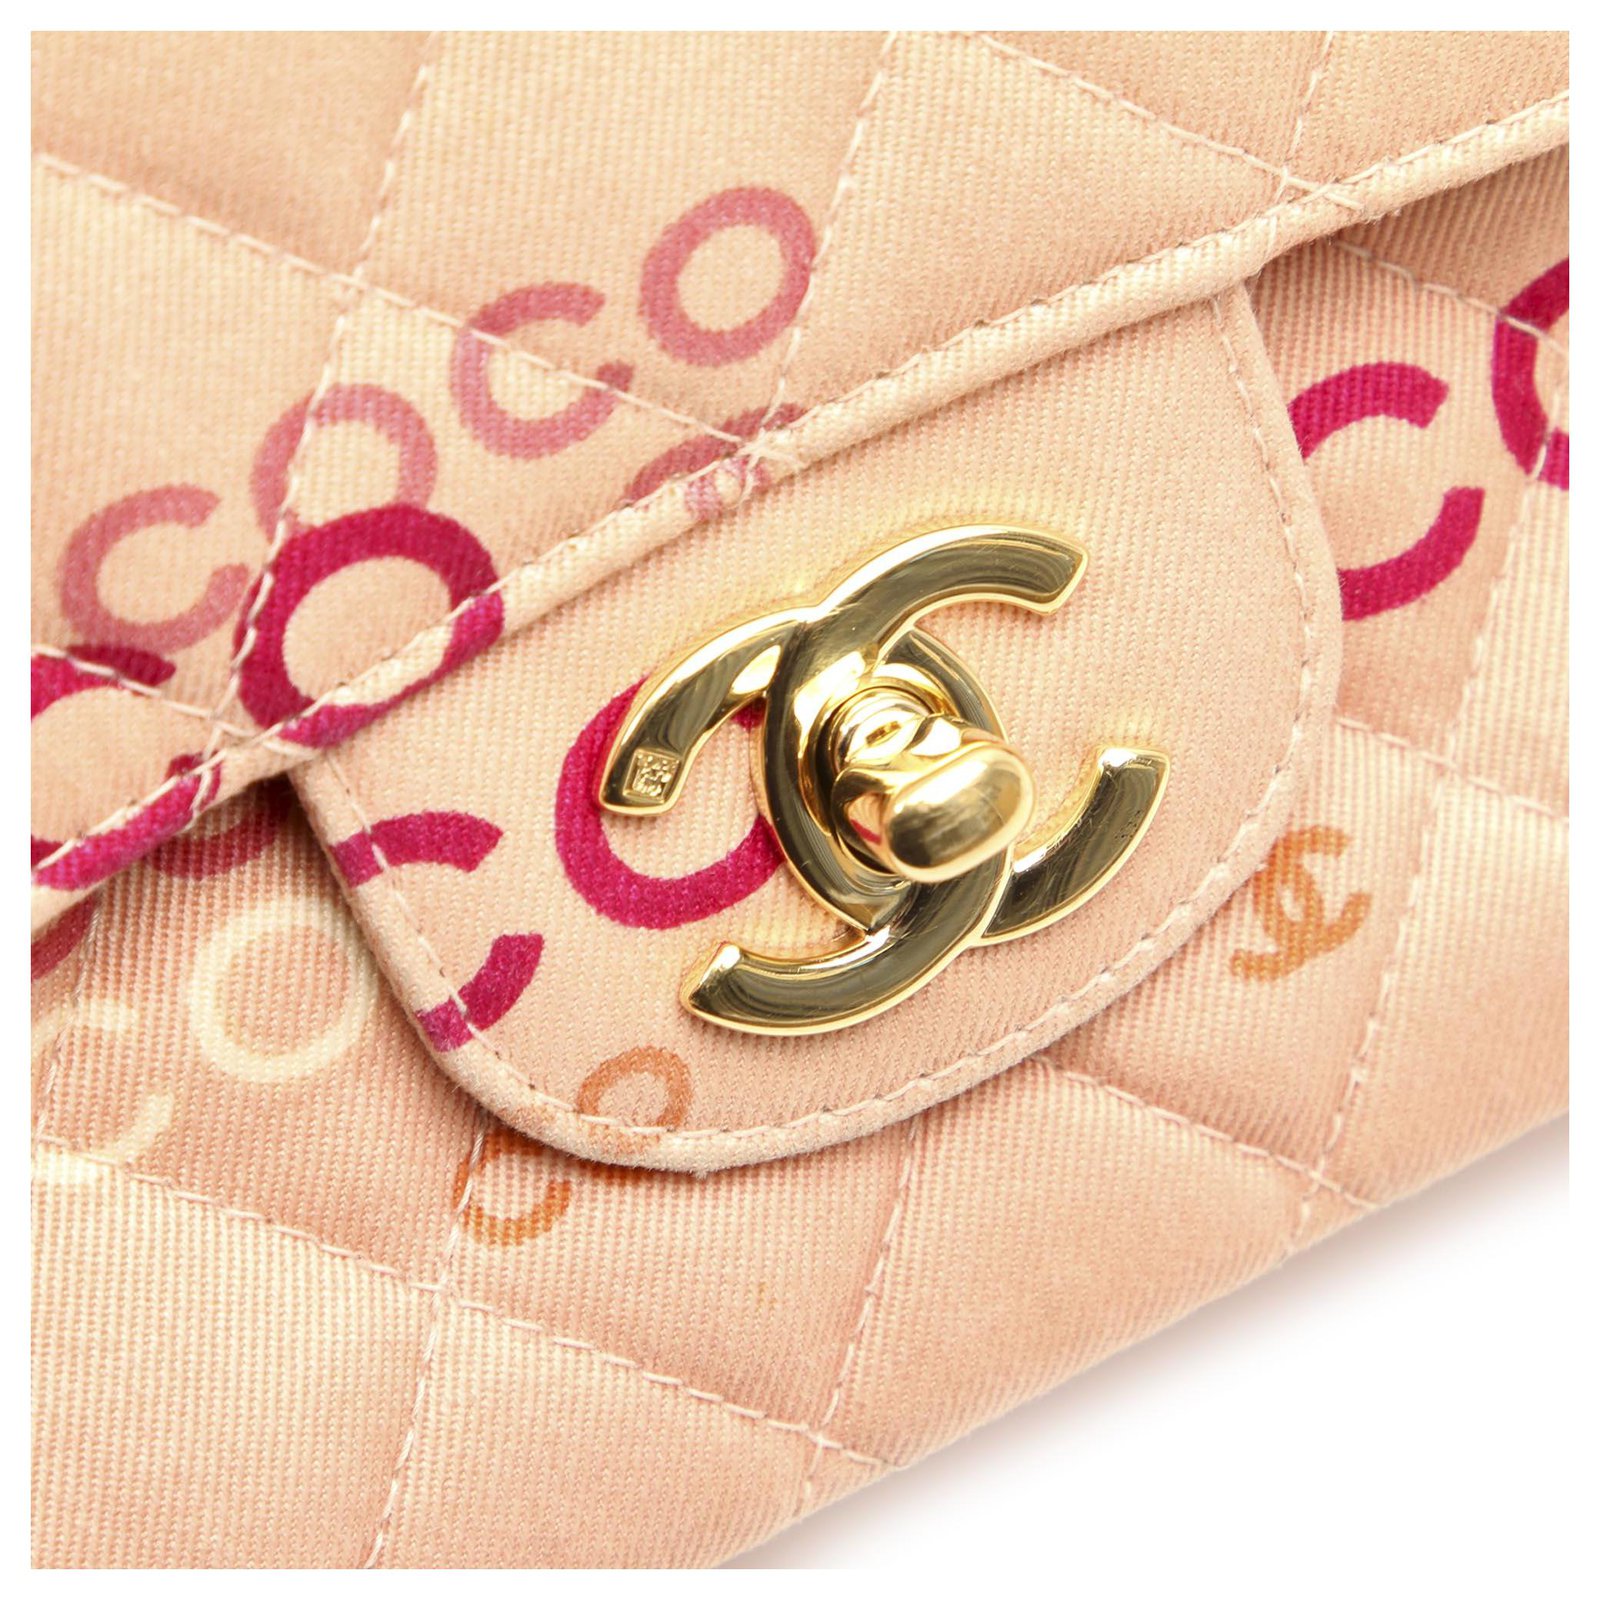 Chanel Pink Medium Coco Classic lined Flap Bag